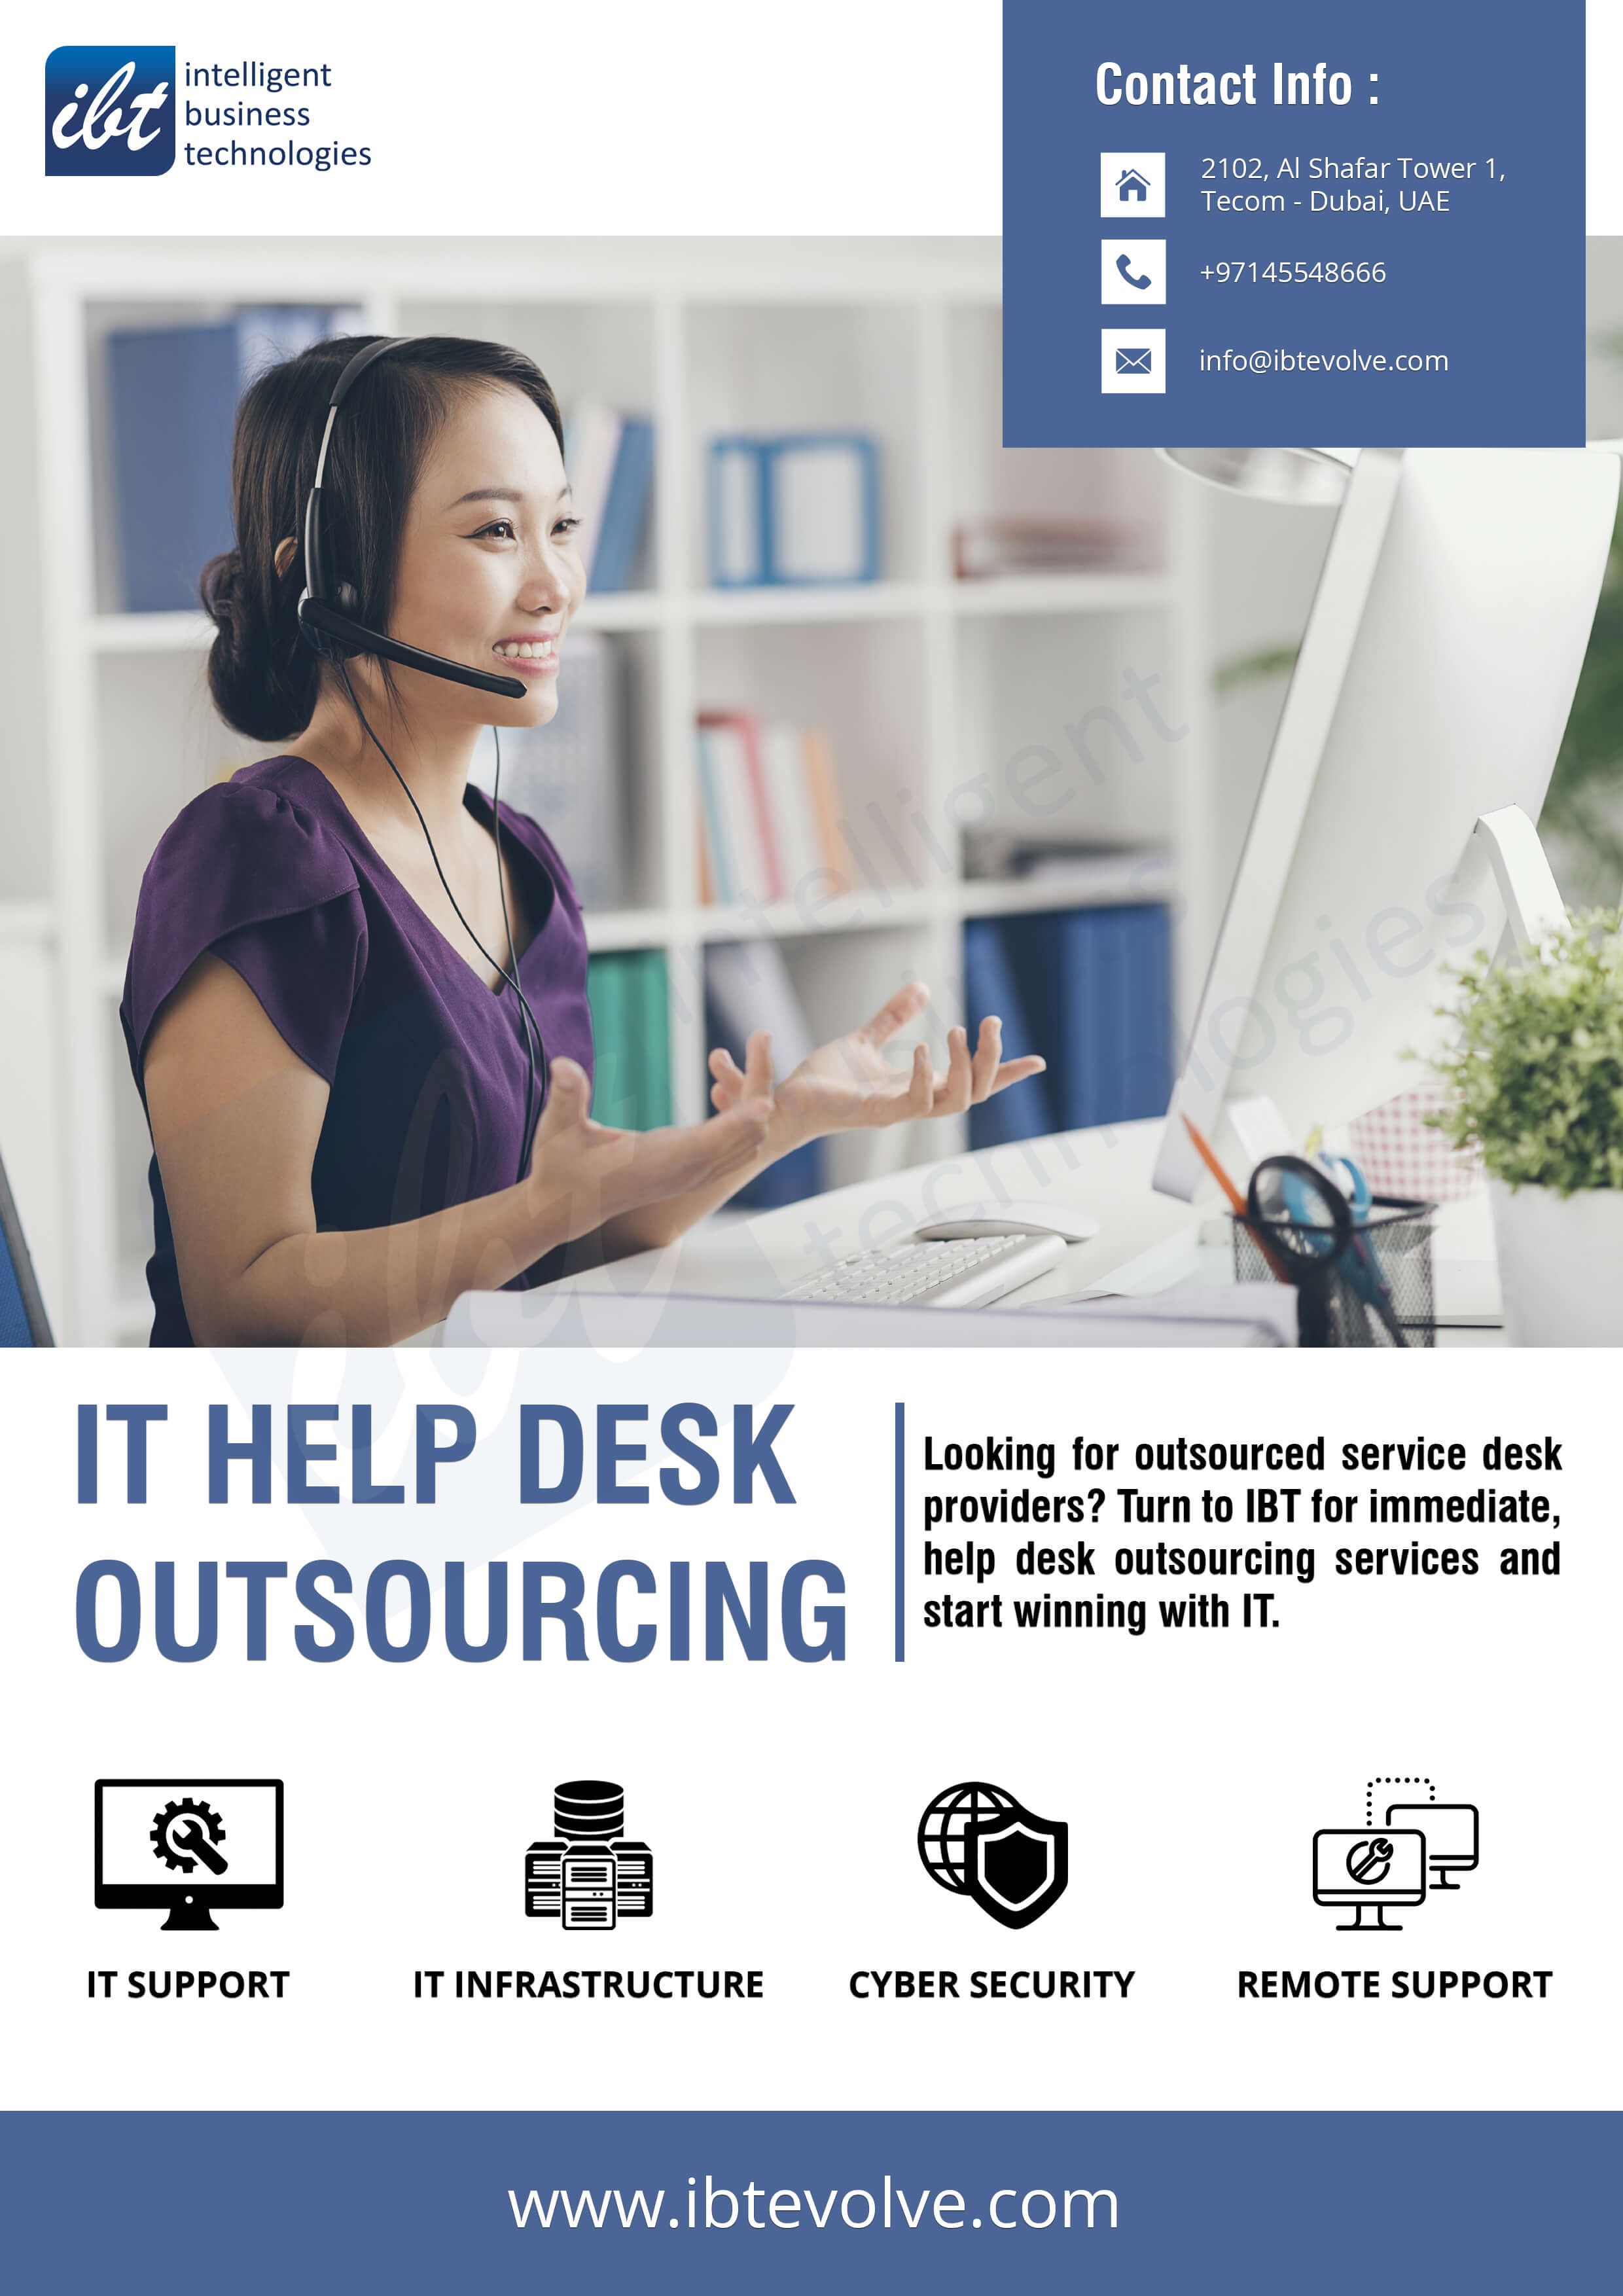 Enhance IT Help Desk Support With IBT